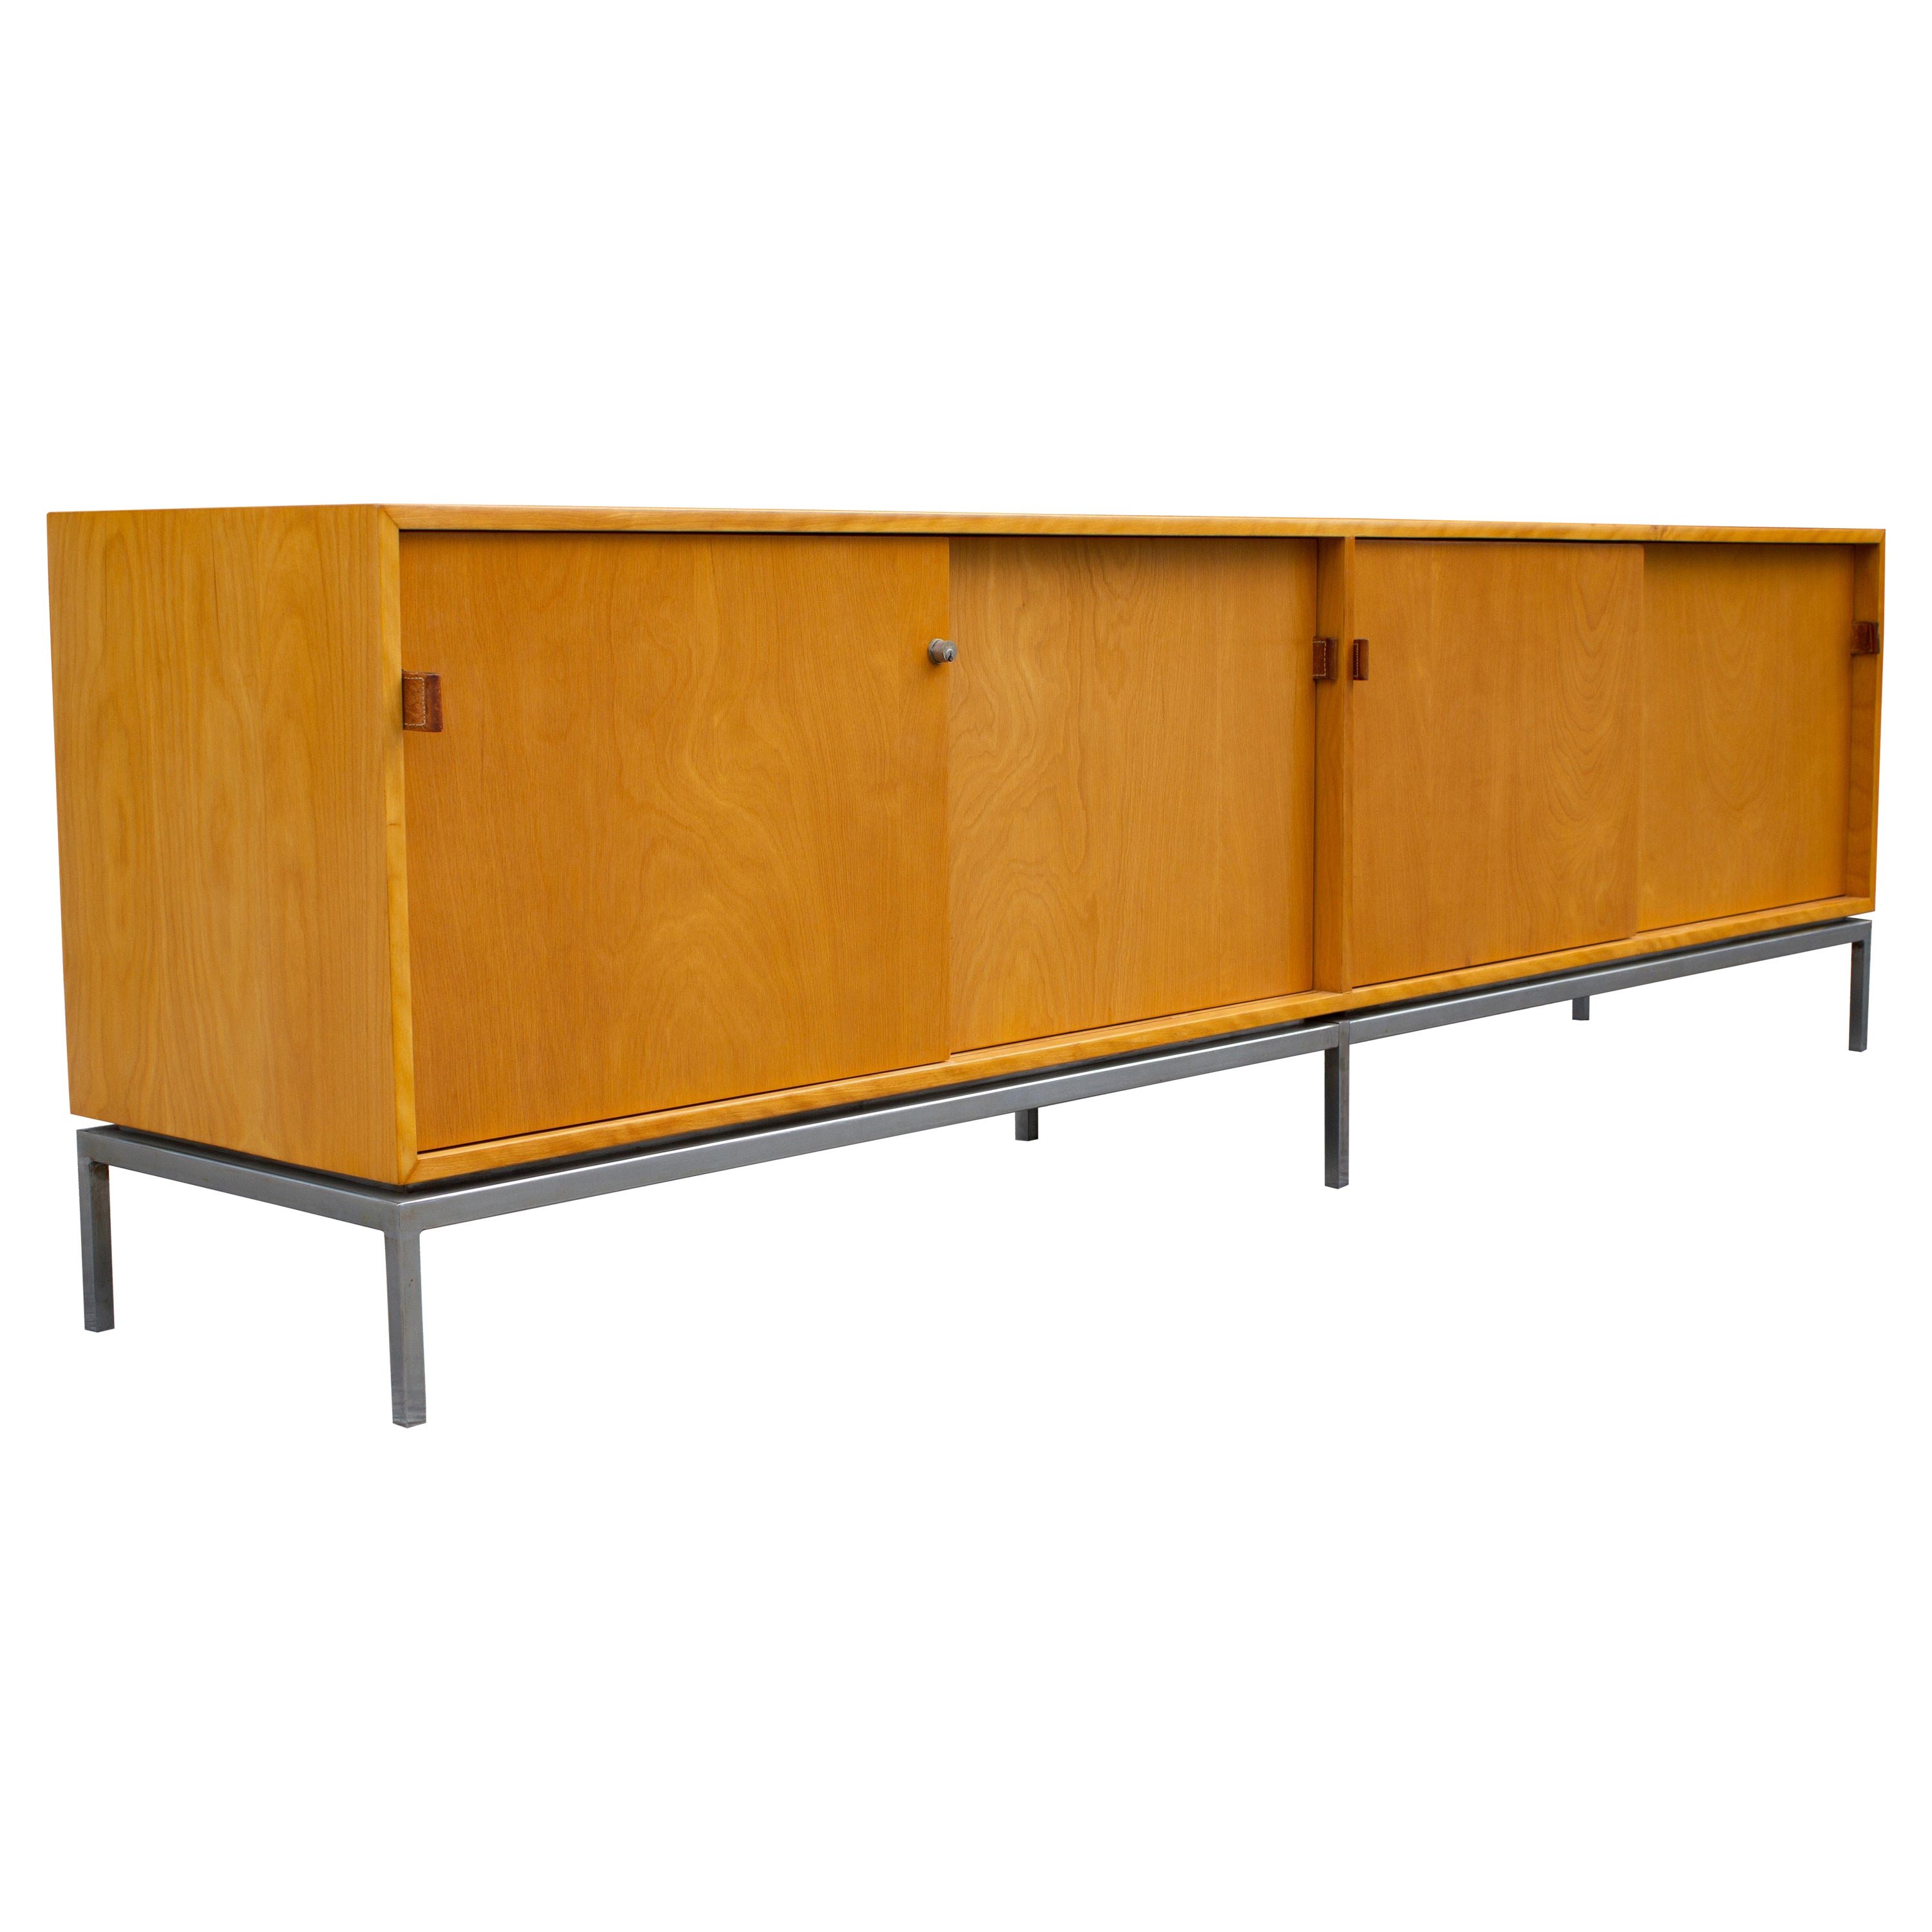 Florence Knoll Maple Credenza with Leather Pulls and Oak Drawers Early 1950s